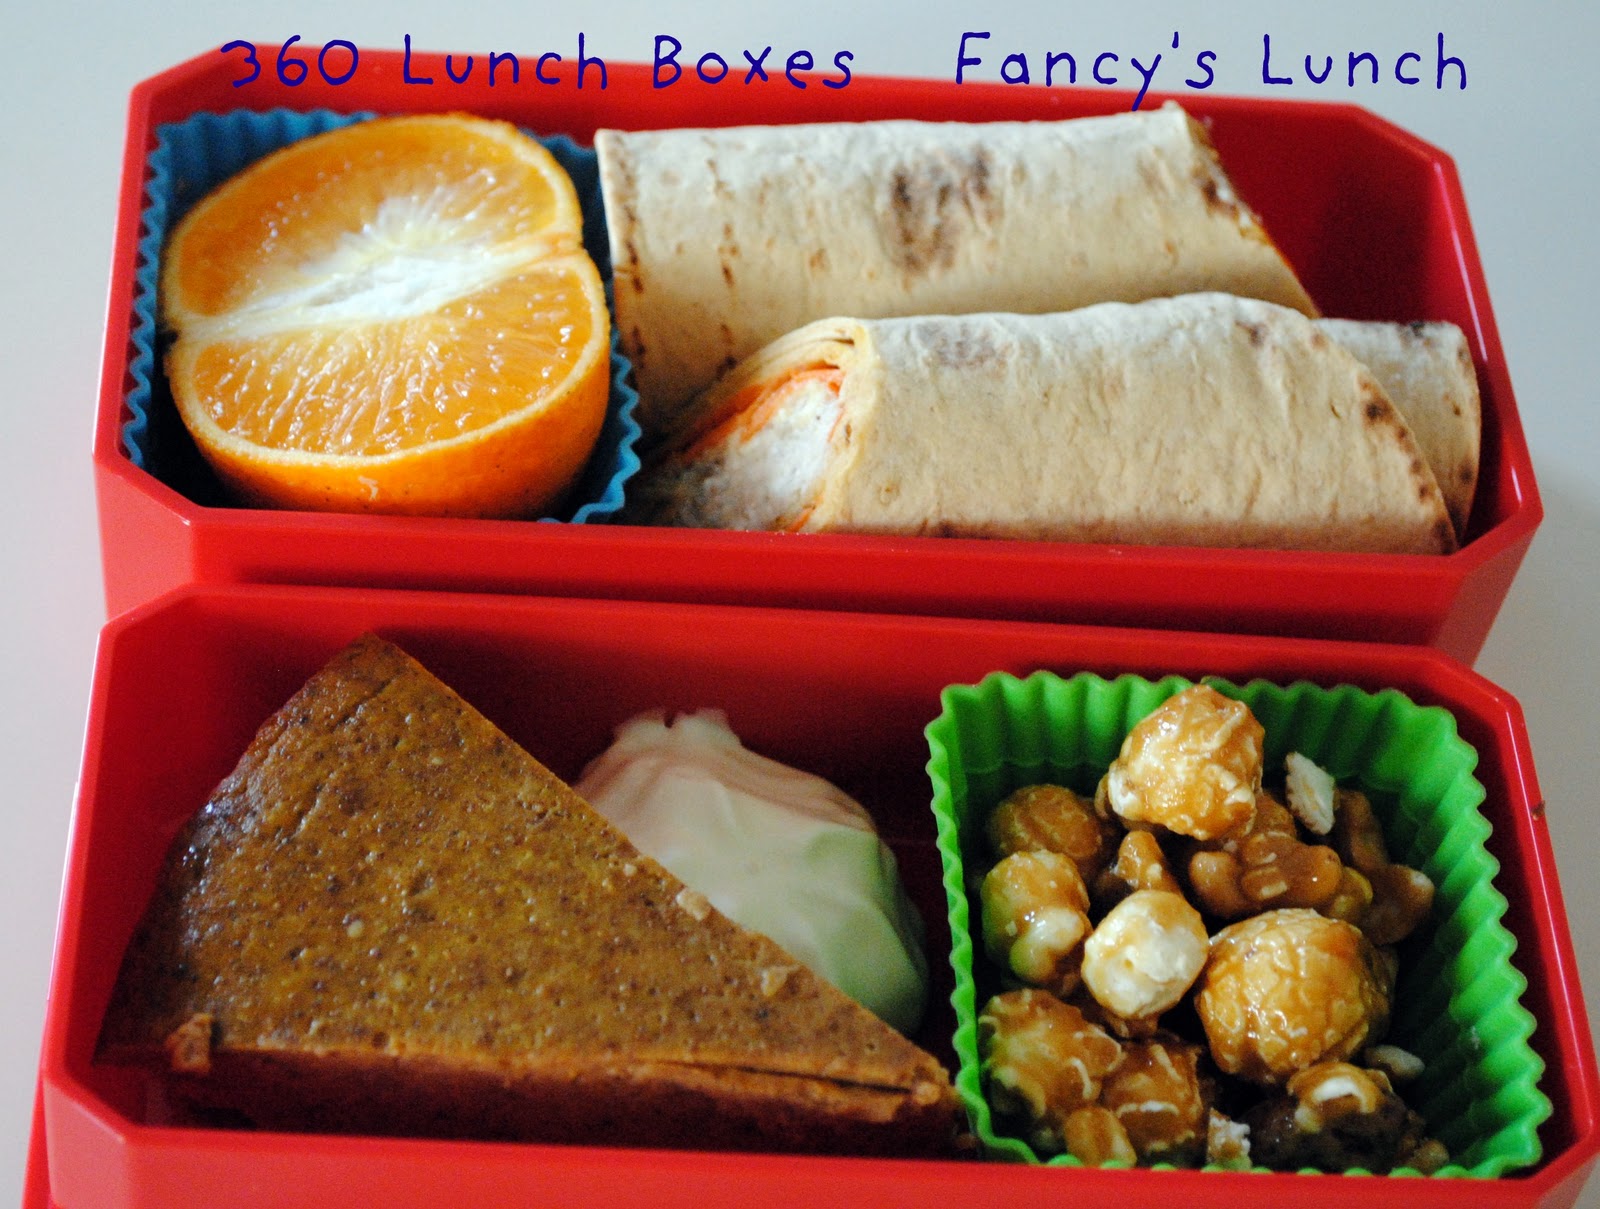 360 Lunch Boxes: It's Back to School Again!